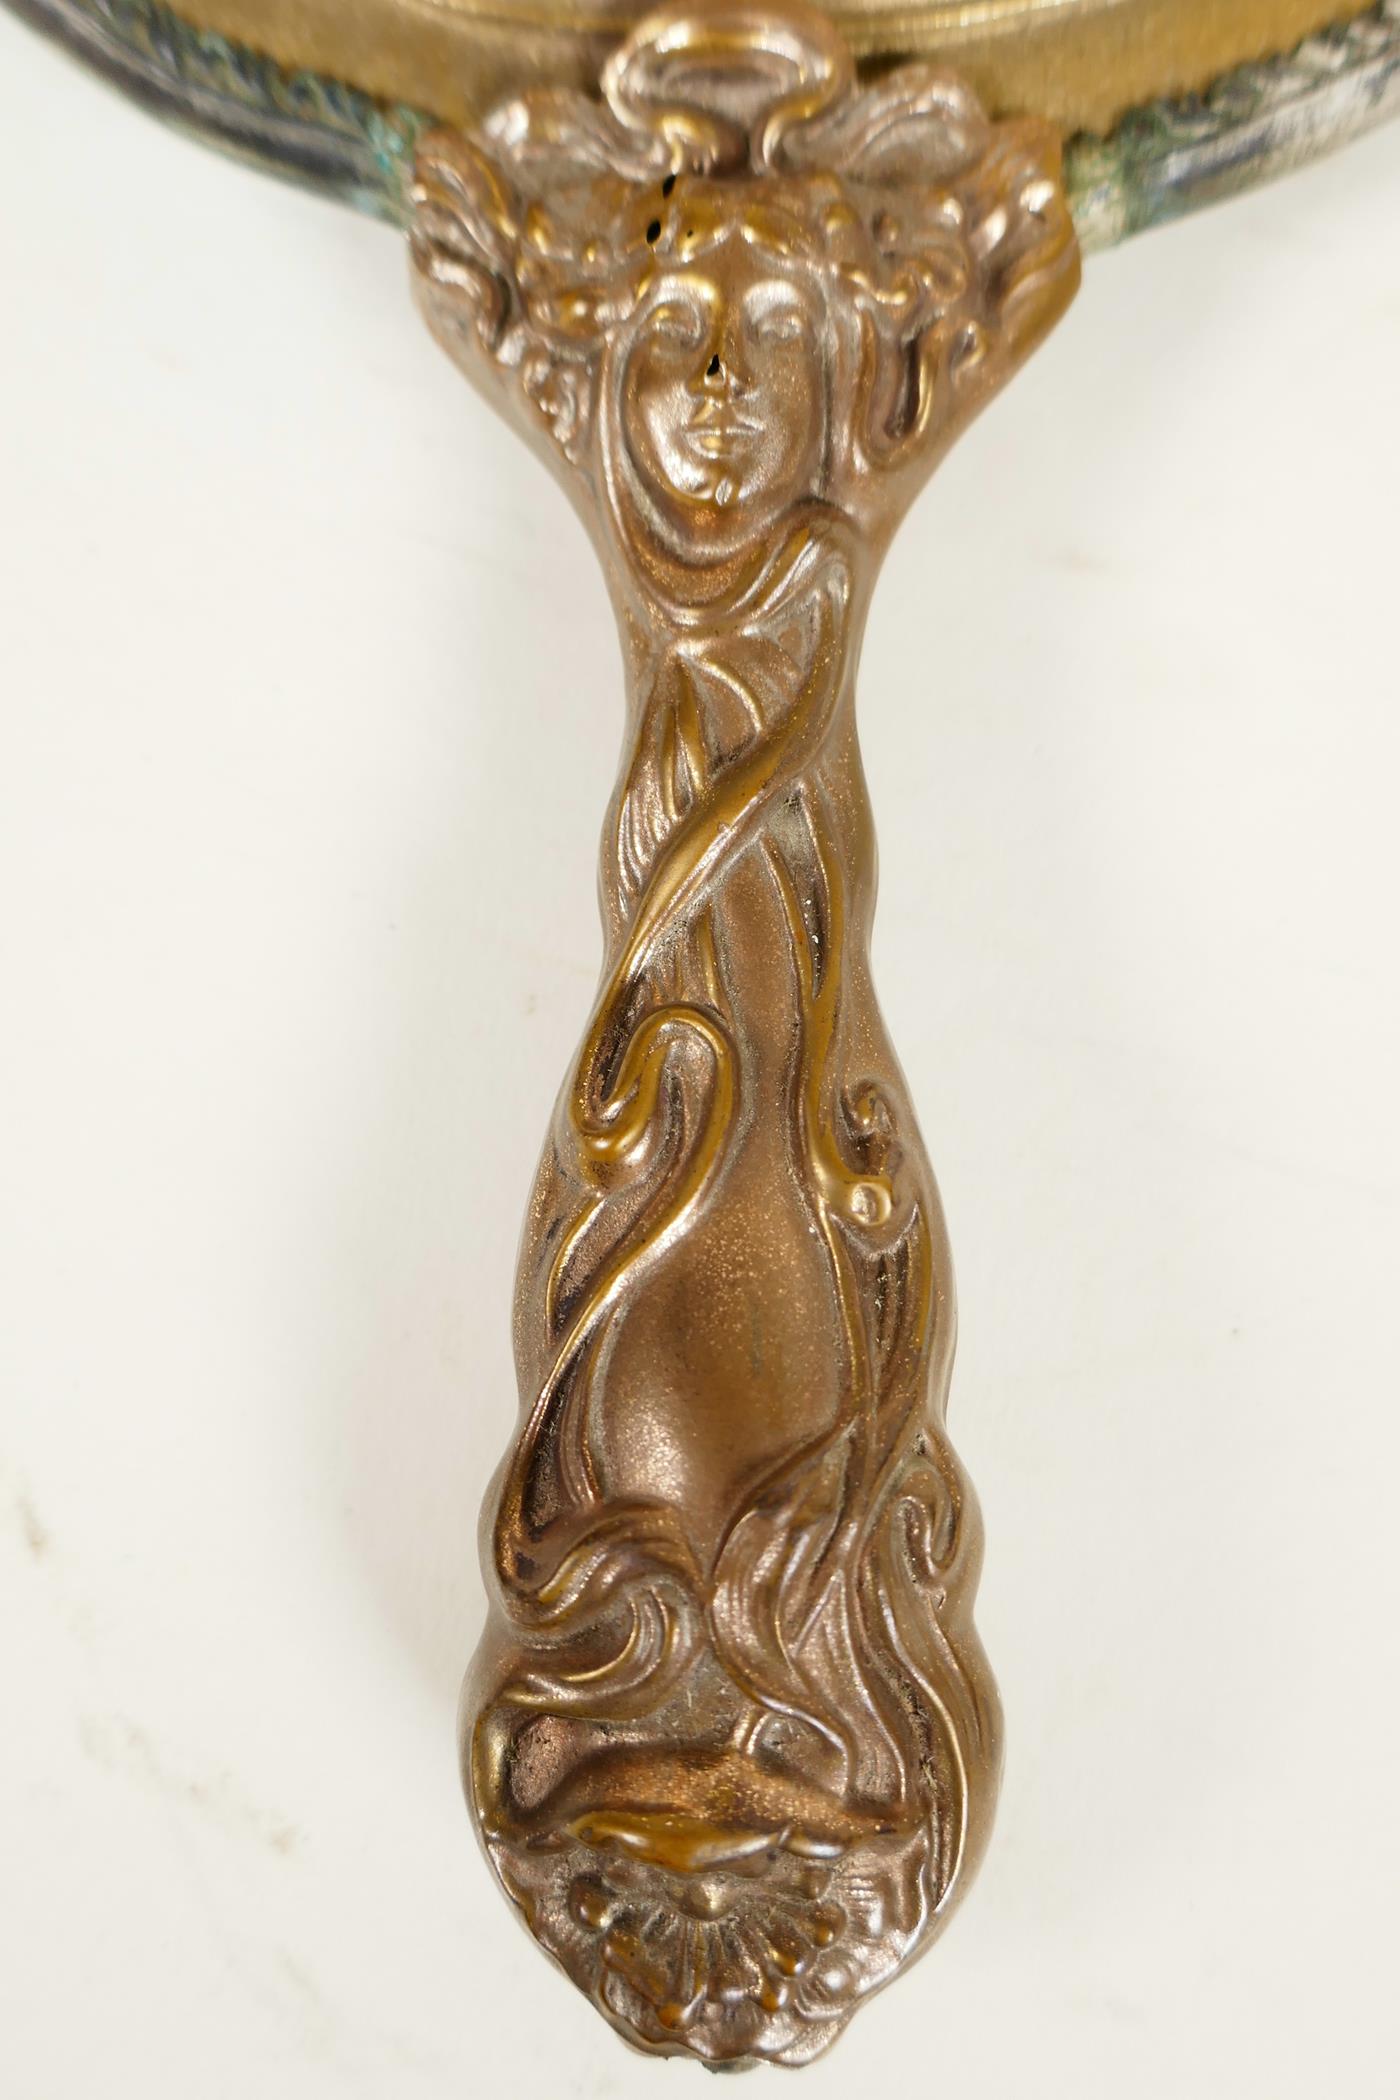 A C19th Art Nouveau bronze hand mirror embossed with scrolls and faces, and bejewelled glass mirror, - Image 2 of 4